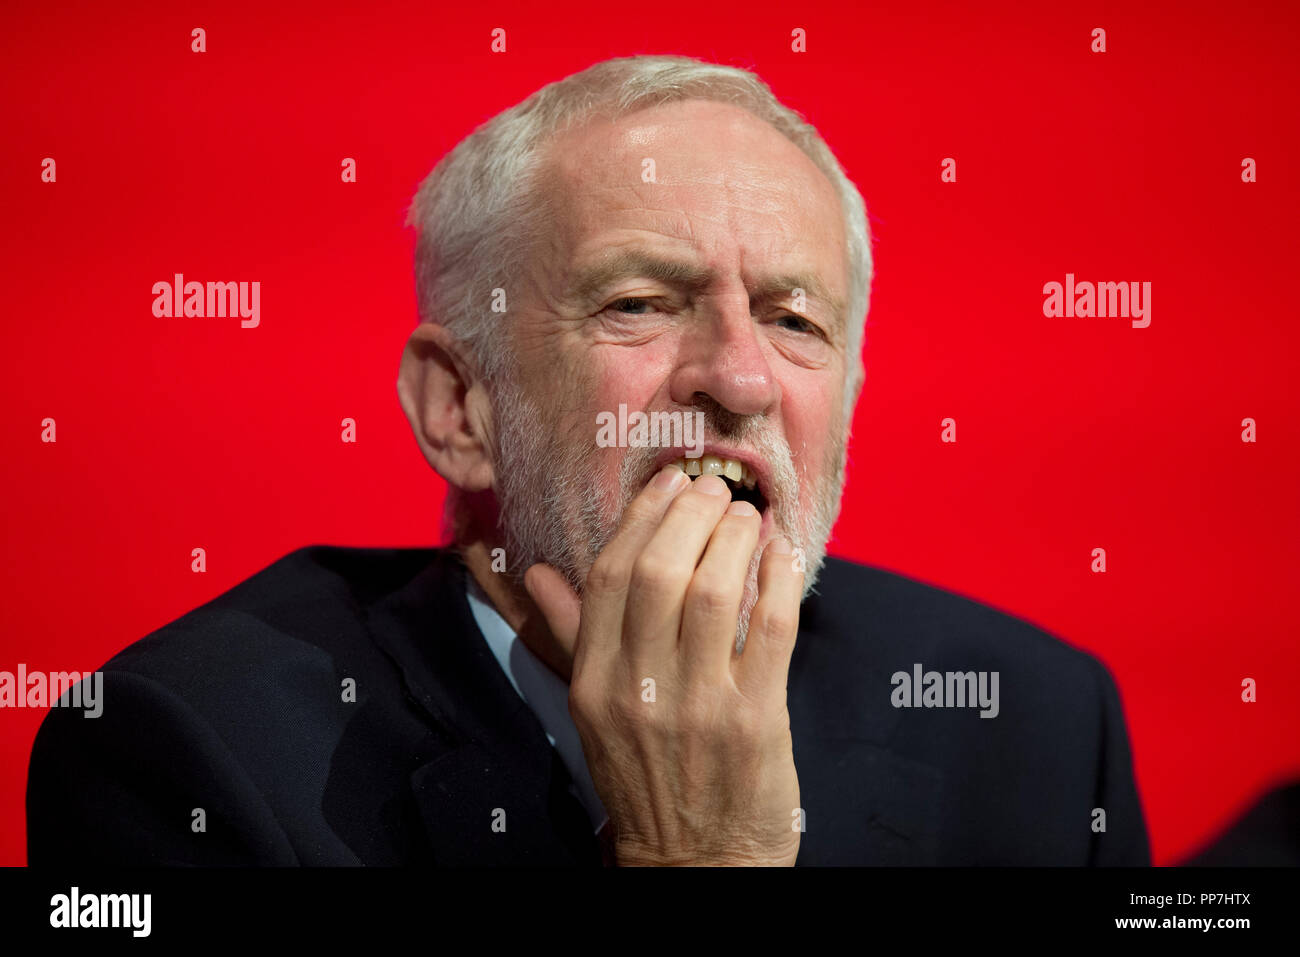 Liverpool, UK. 24th September 2018. Jeremy Corbyn, Leader of the Opposition, Leader of the Labour Party and Labour MP for Islington North attends theLabour Party Conference in Liverpool. © Russell Hart/Alamy Live News. Stock Photo